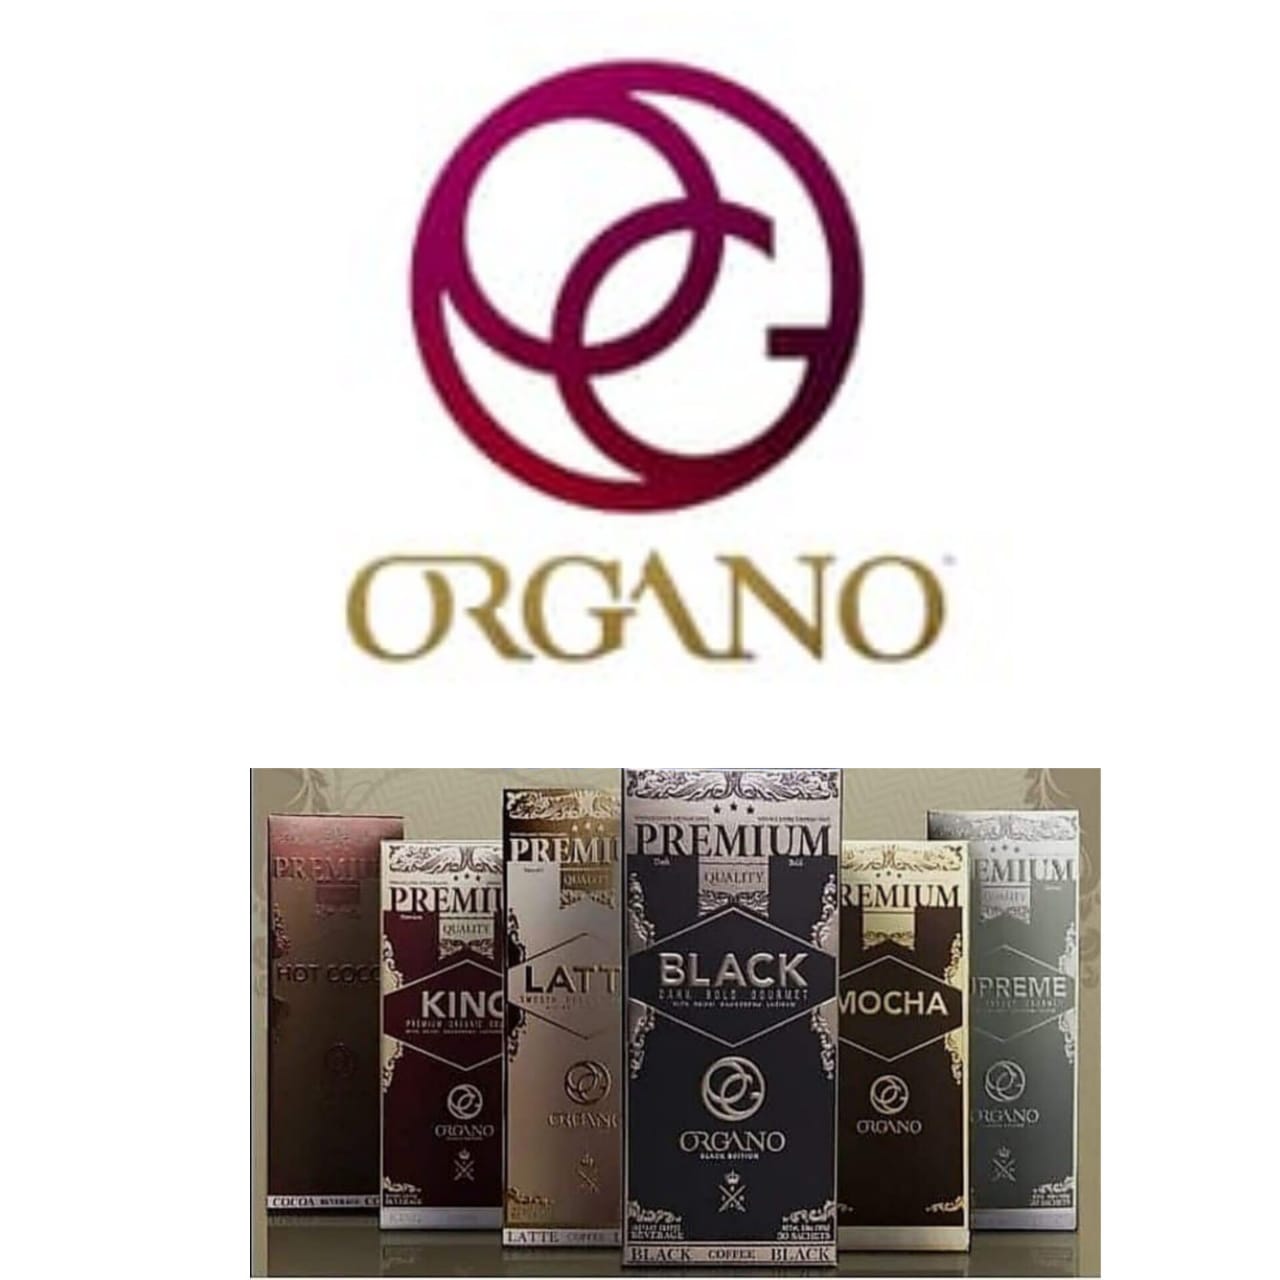 ORGANO BRAND IN A LEGAL TUSSLE FOR SWINDLING CUSTOMERS OF TWO HUNDRED MILLION NAIRA